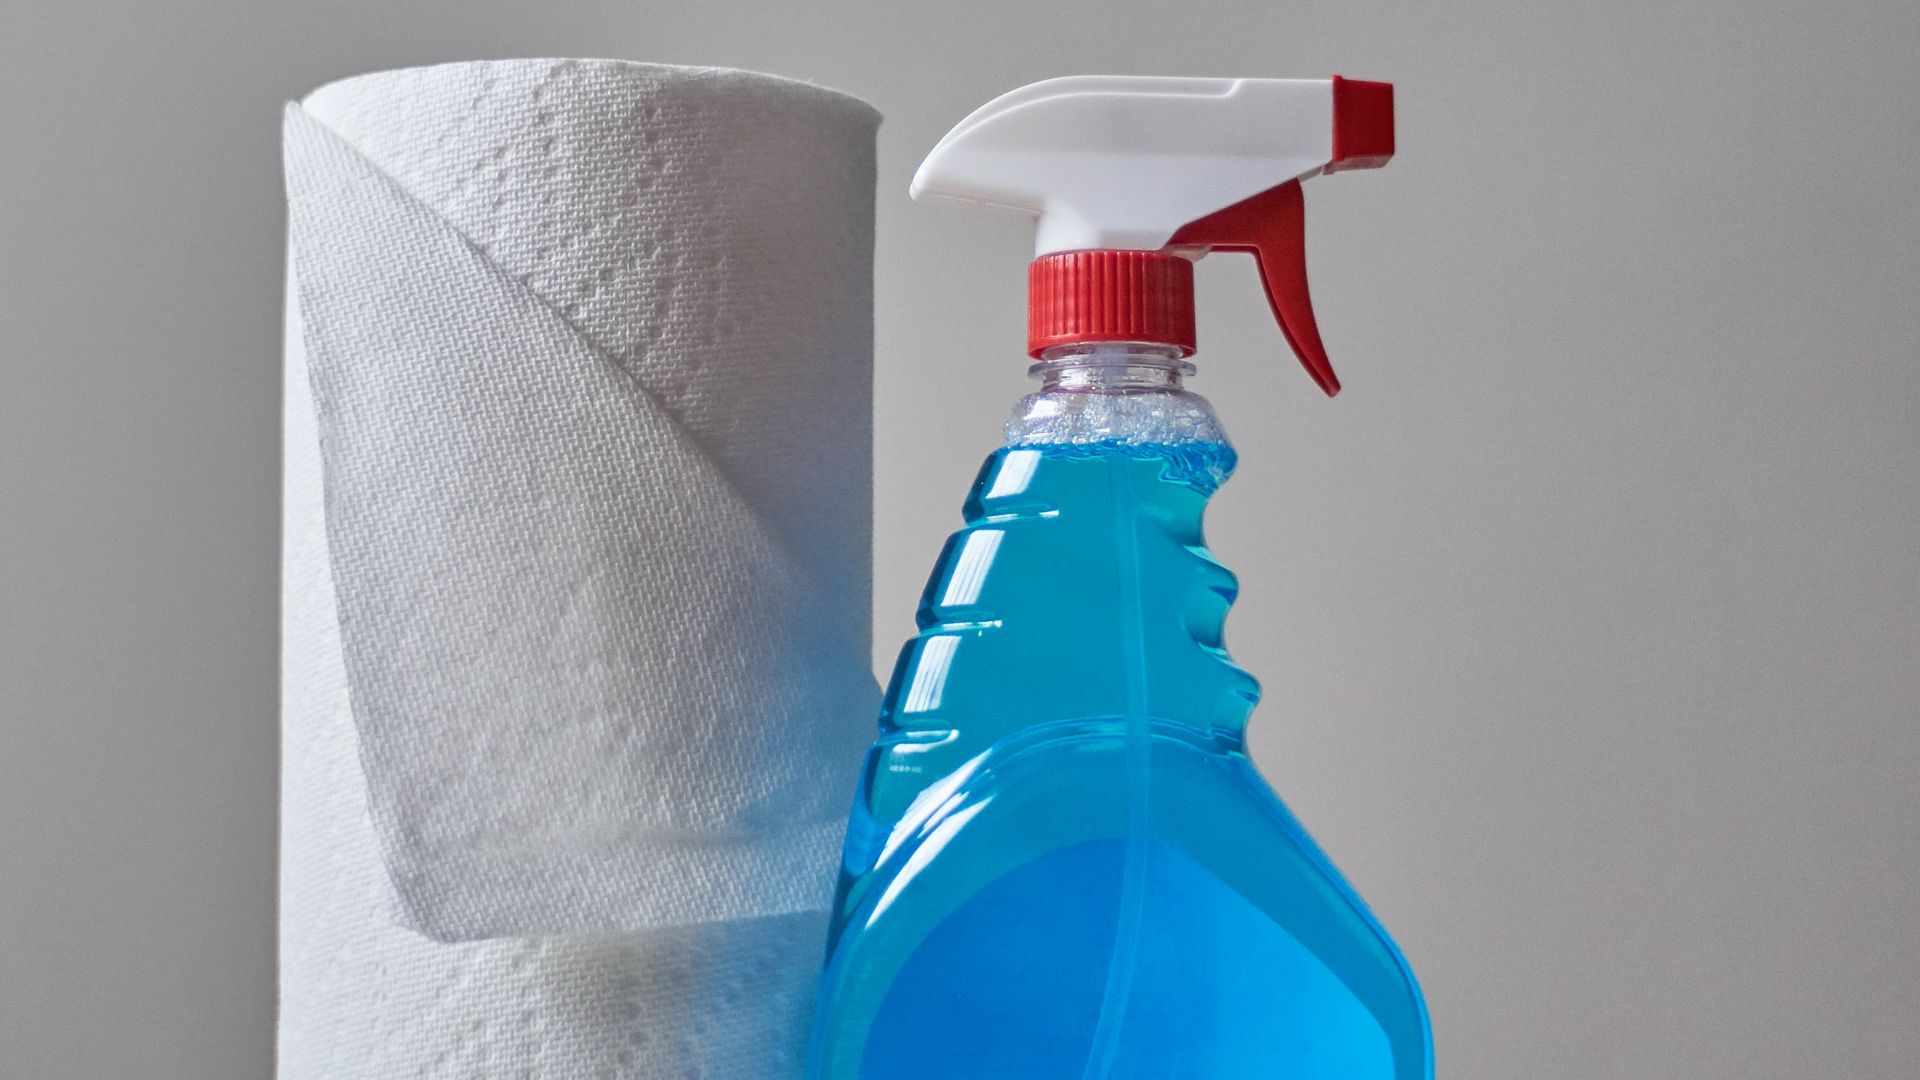 a bottle of cleaner next to a roll of toilet paper.